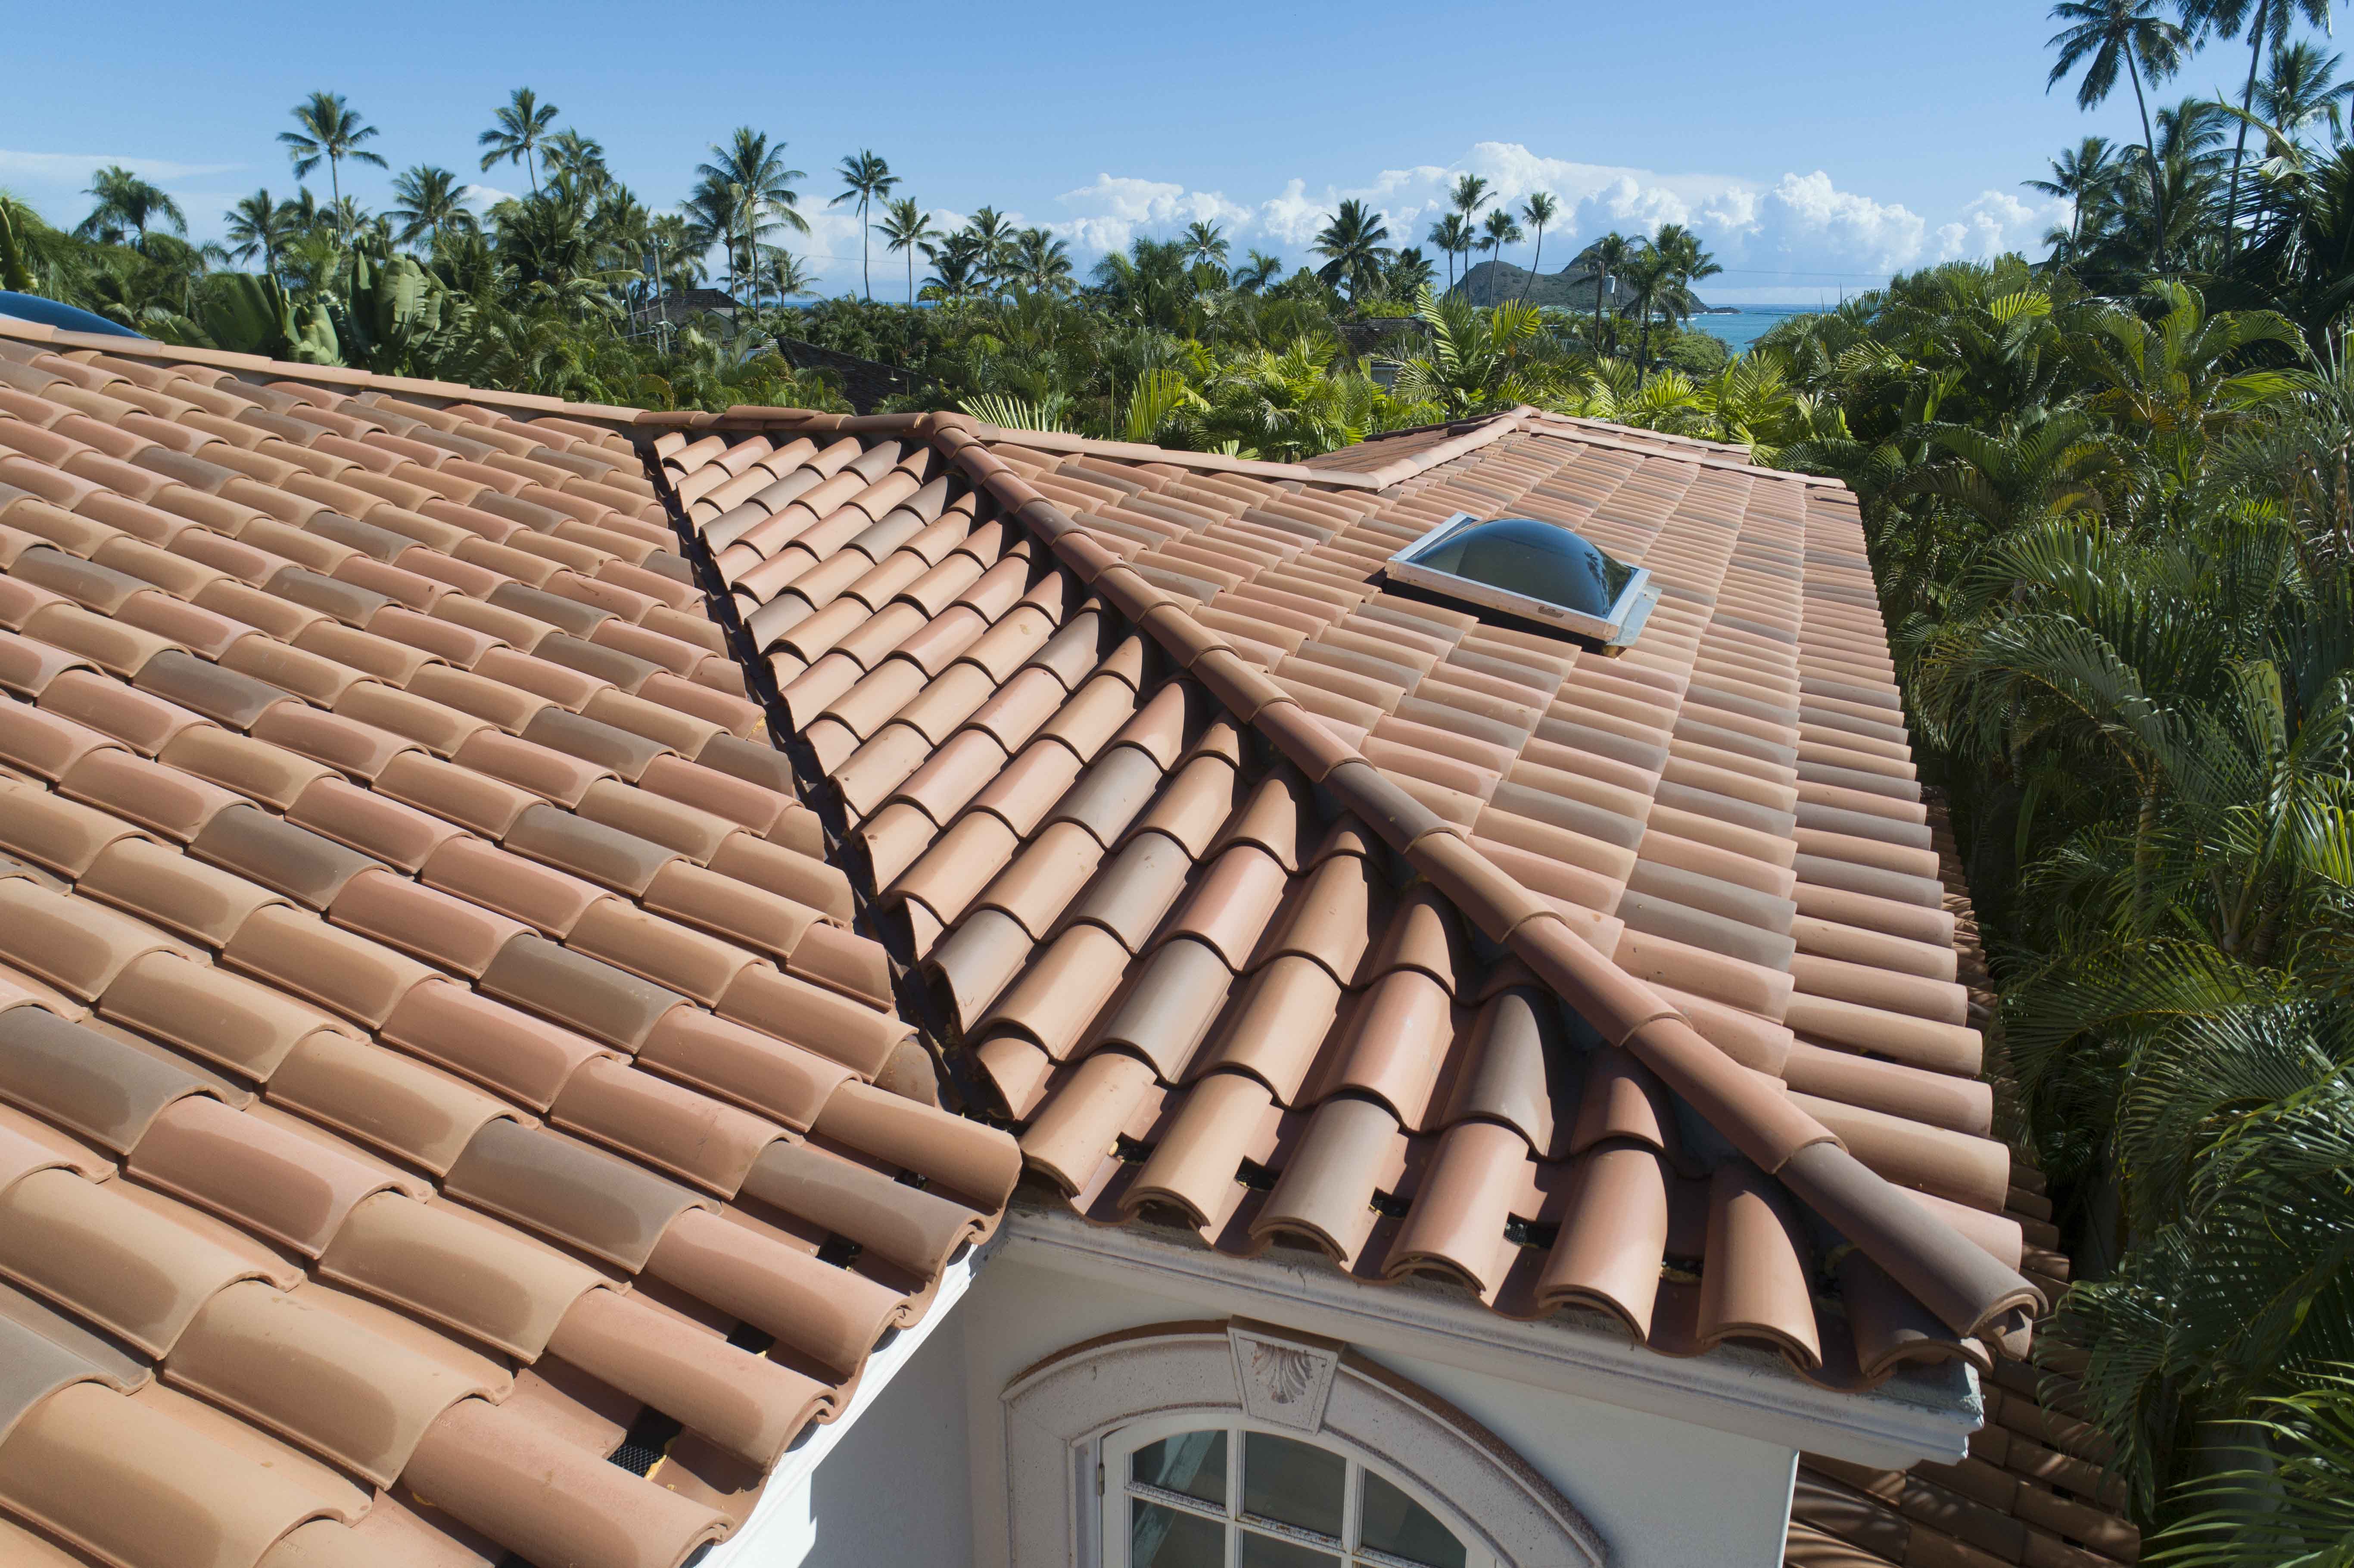 Kailua Roof replacement